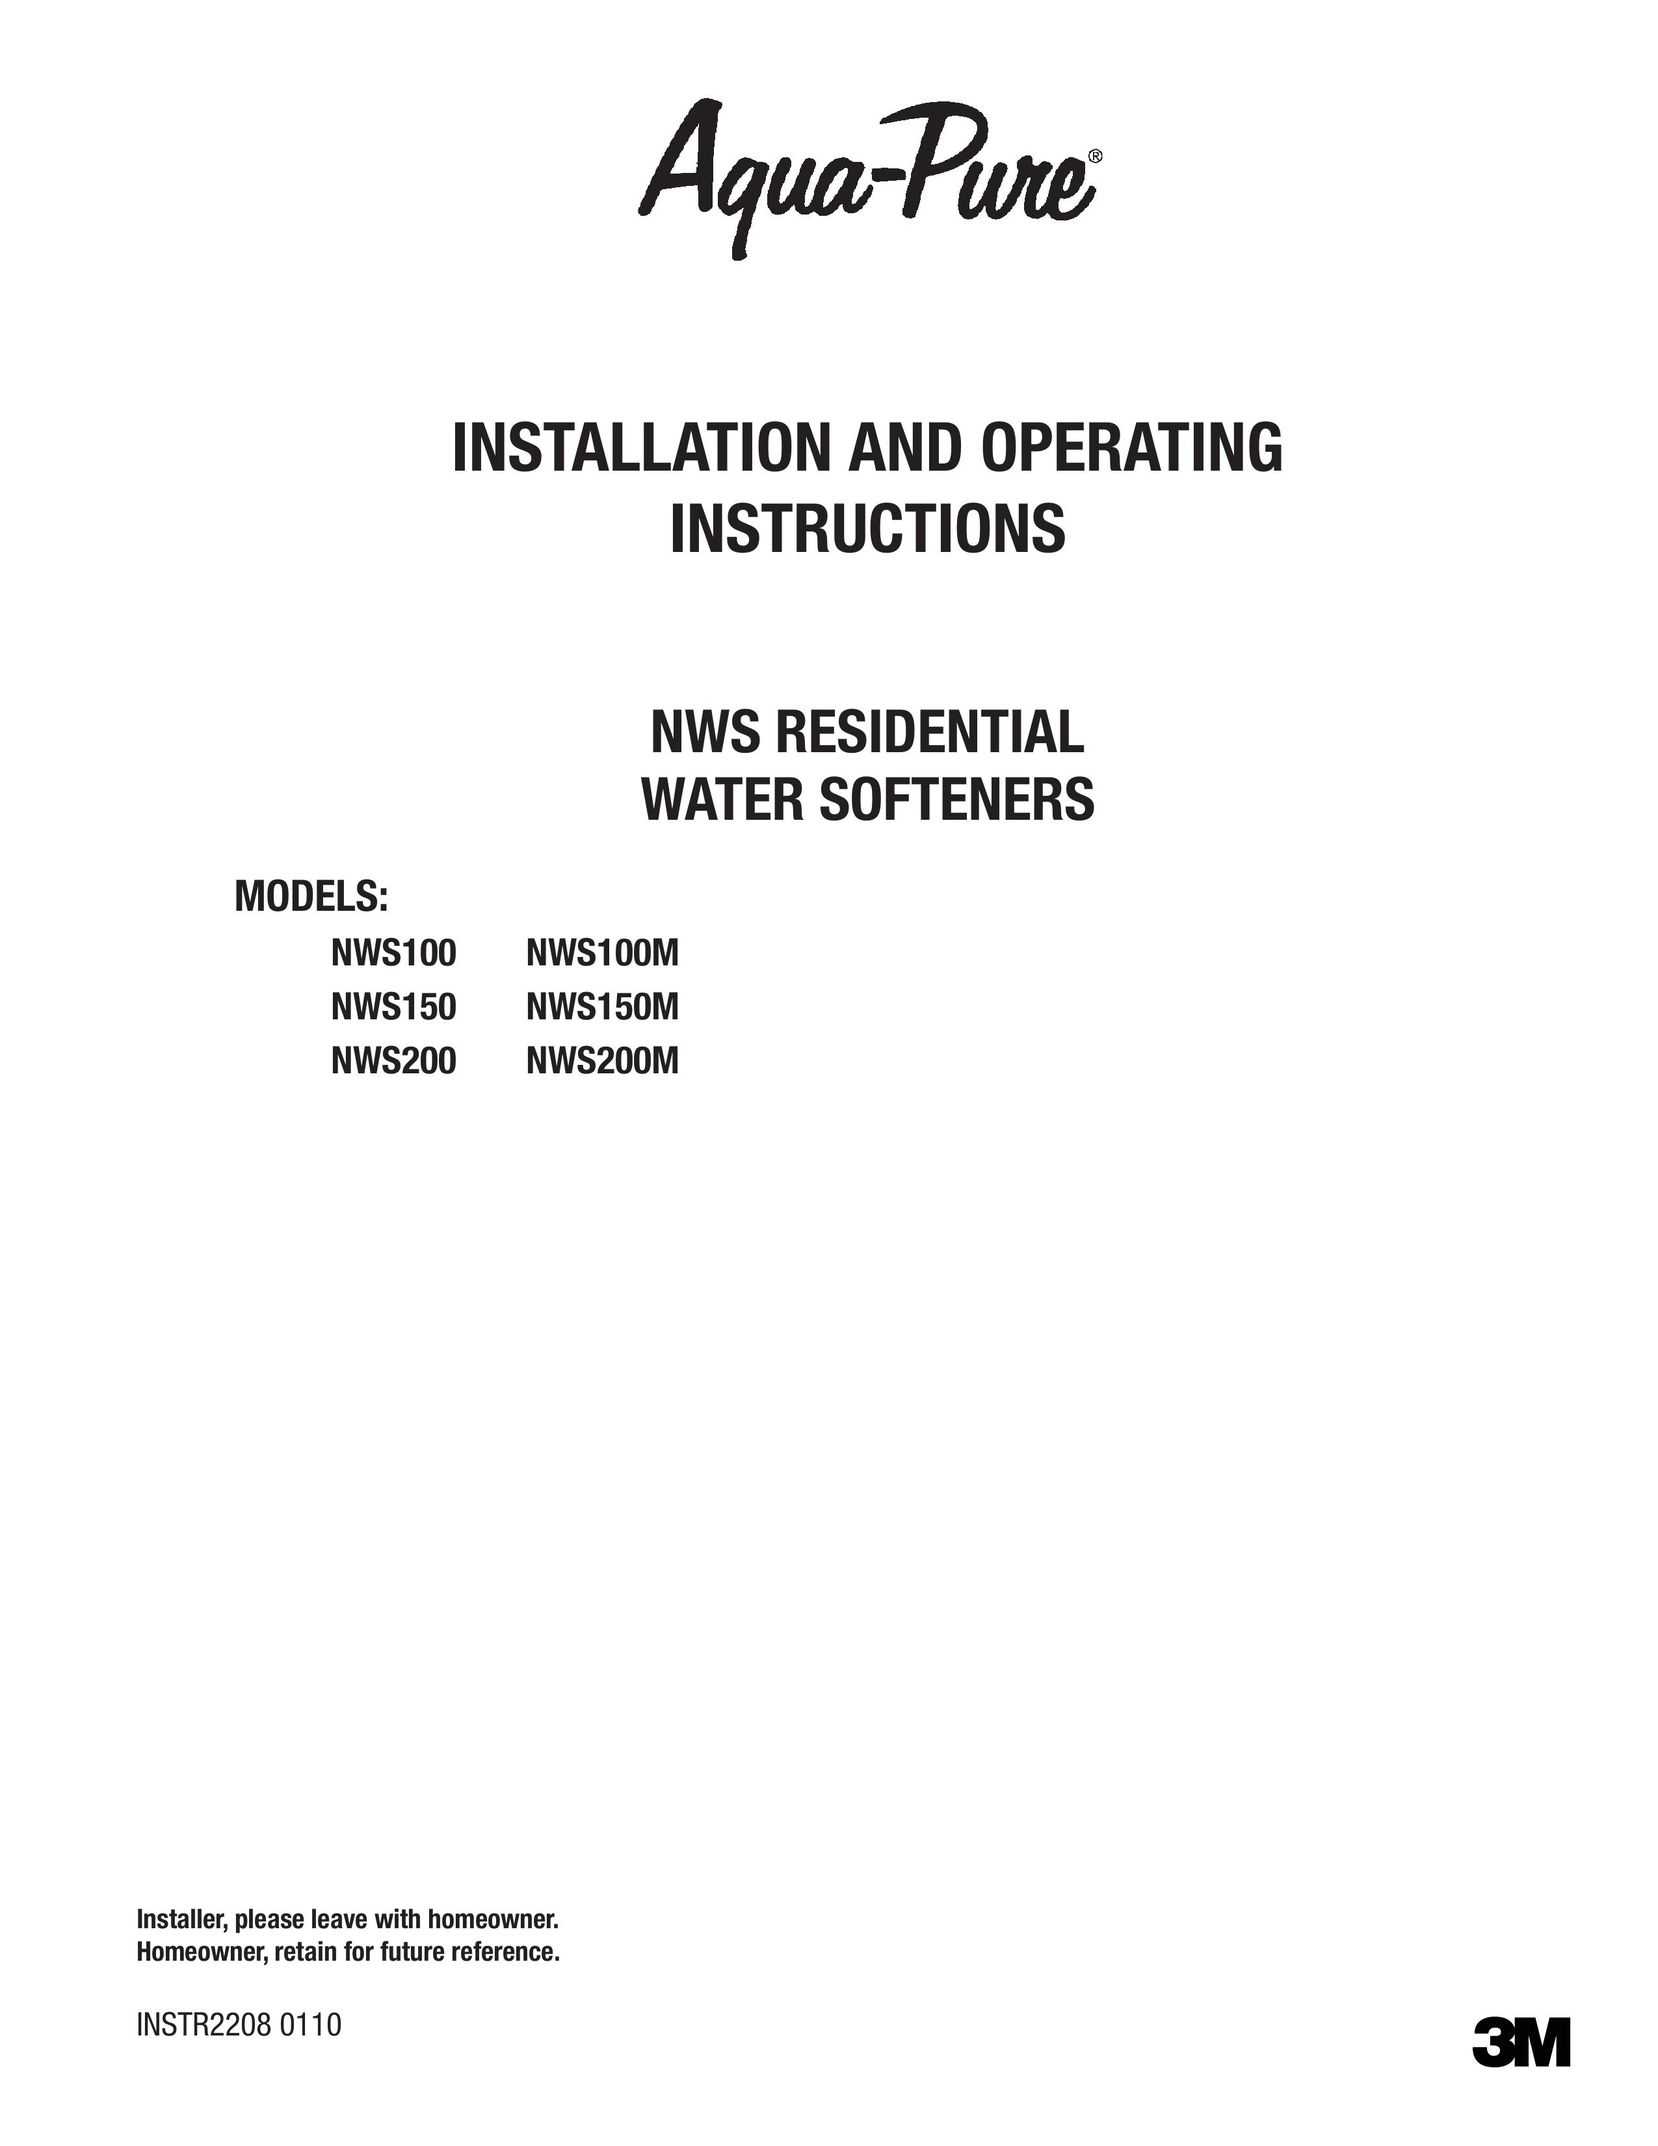 3M NWS200M Water System User Manual